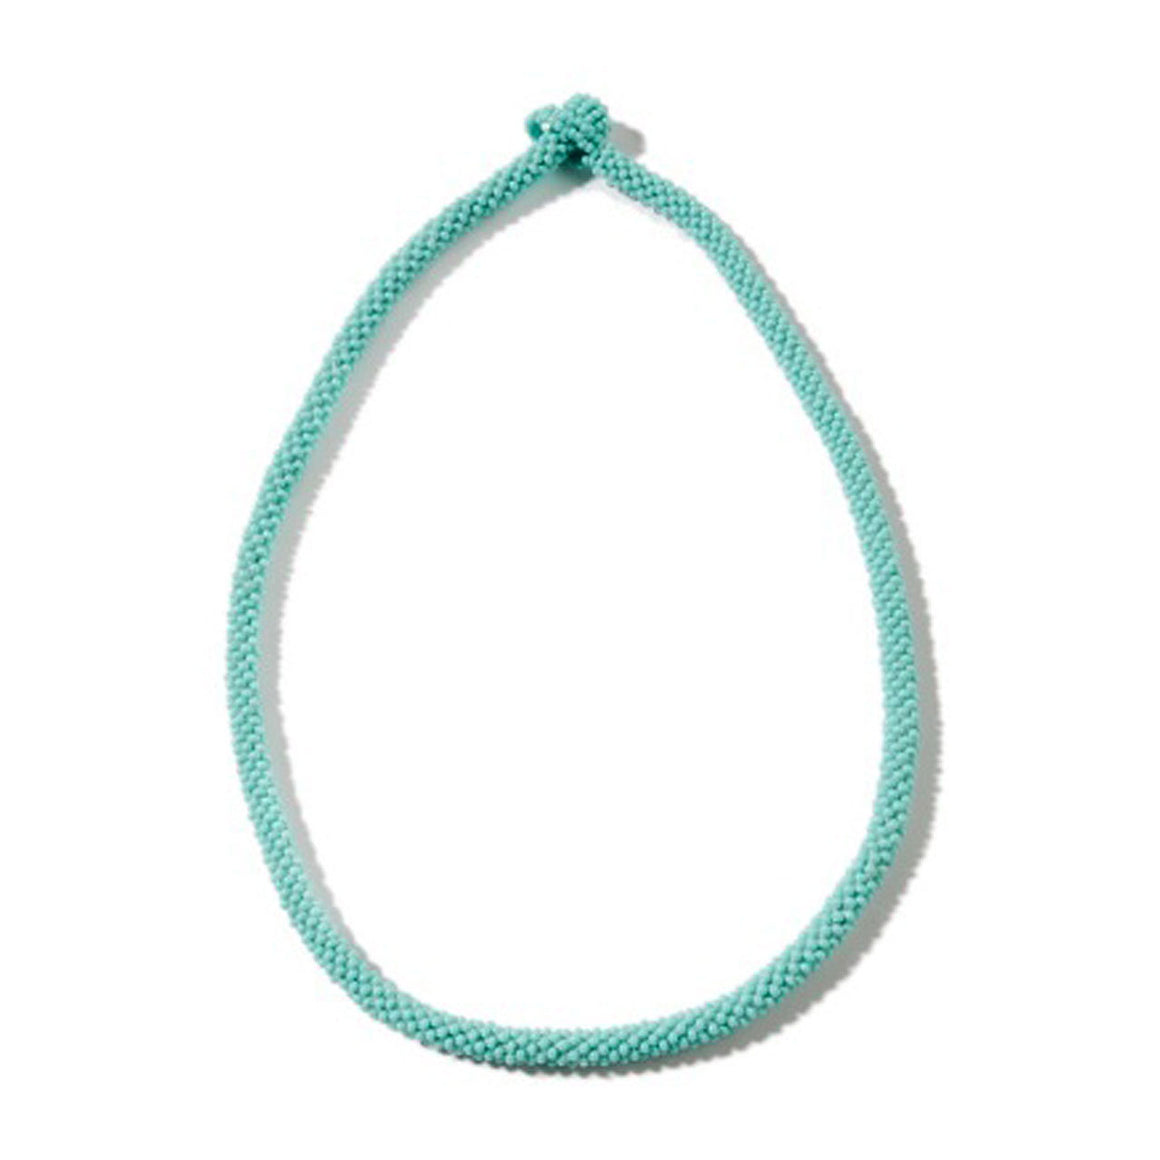 Hand Crocheted Turquoise Coloured Glass Bead Necklace 19.5 inches or 24 inch Length